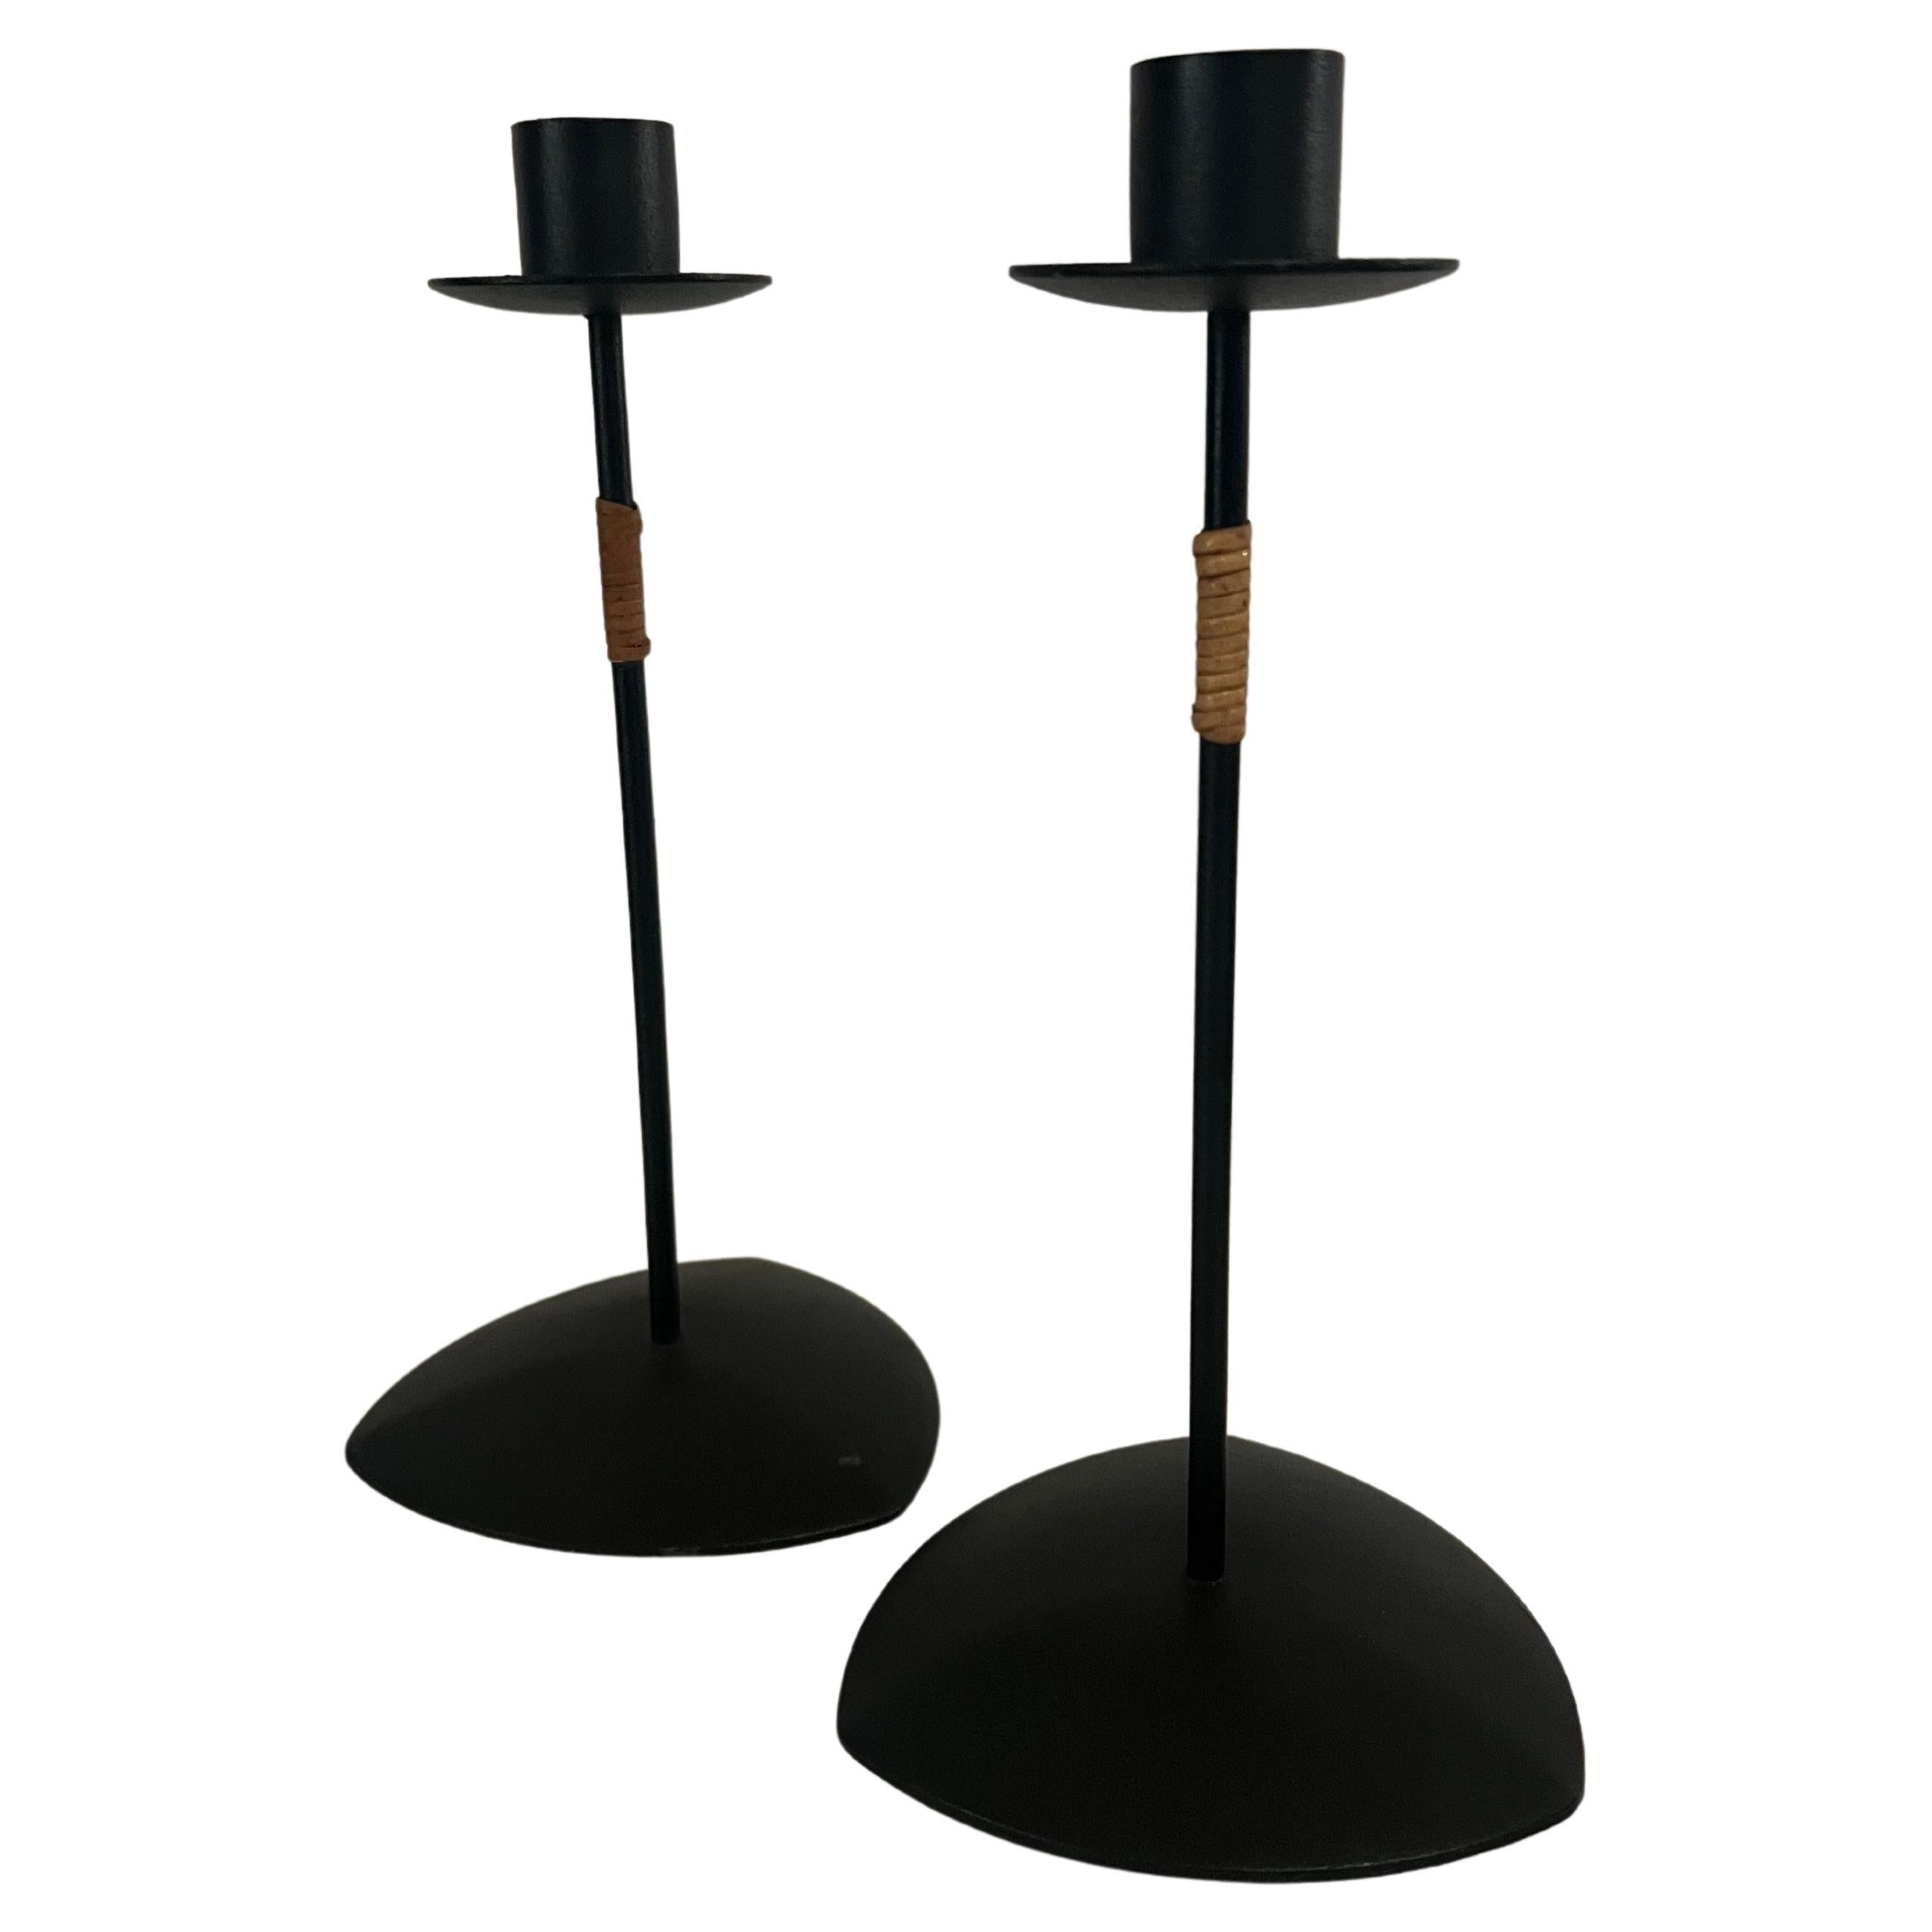 Danish modern Pair of Laurids Lonborg Candle Holders Metal & Cane For Sale